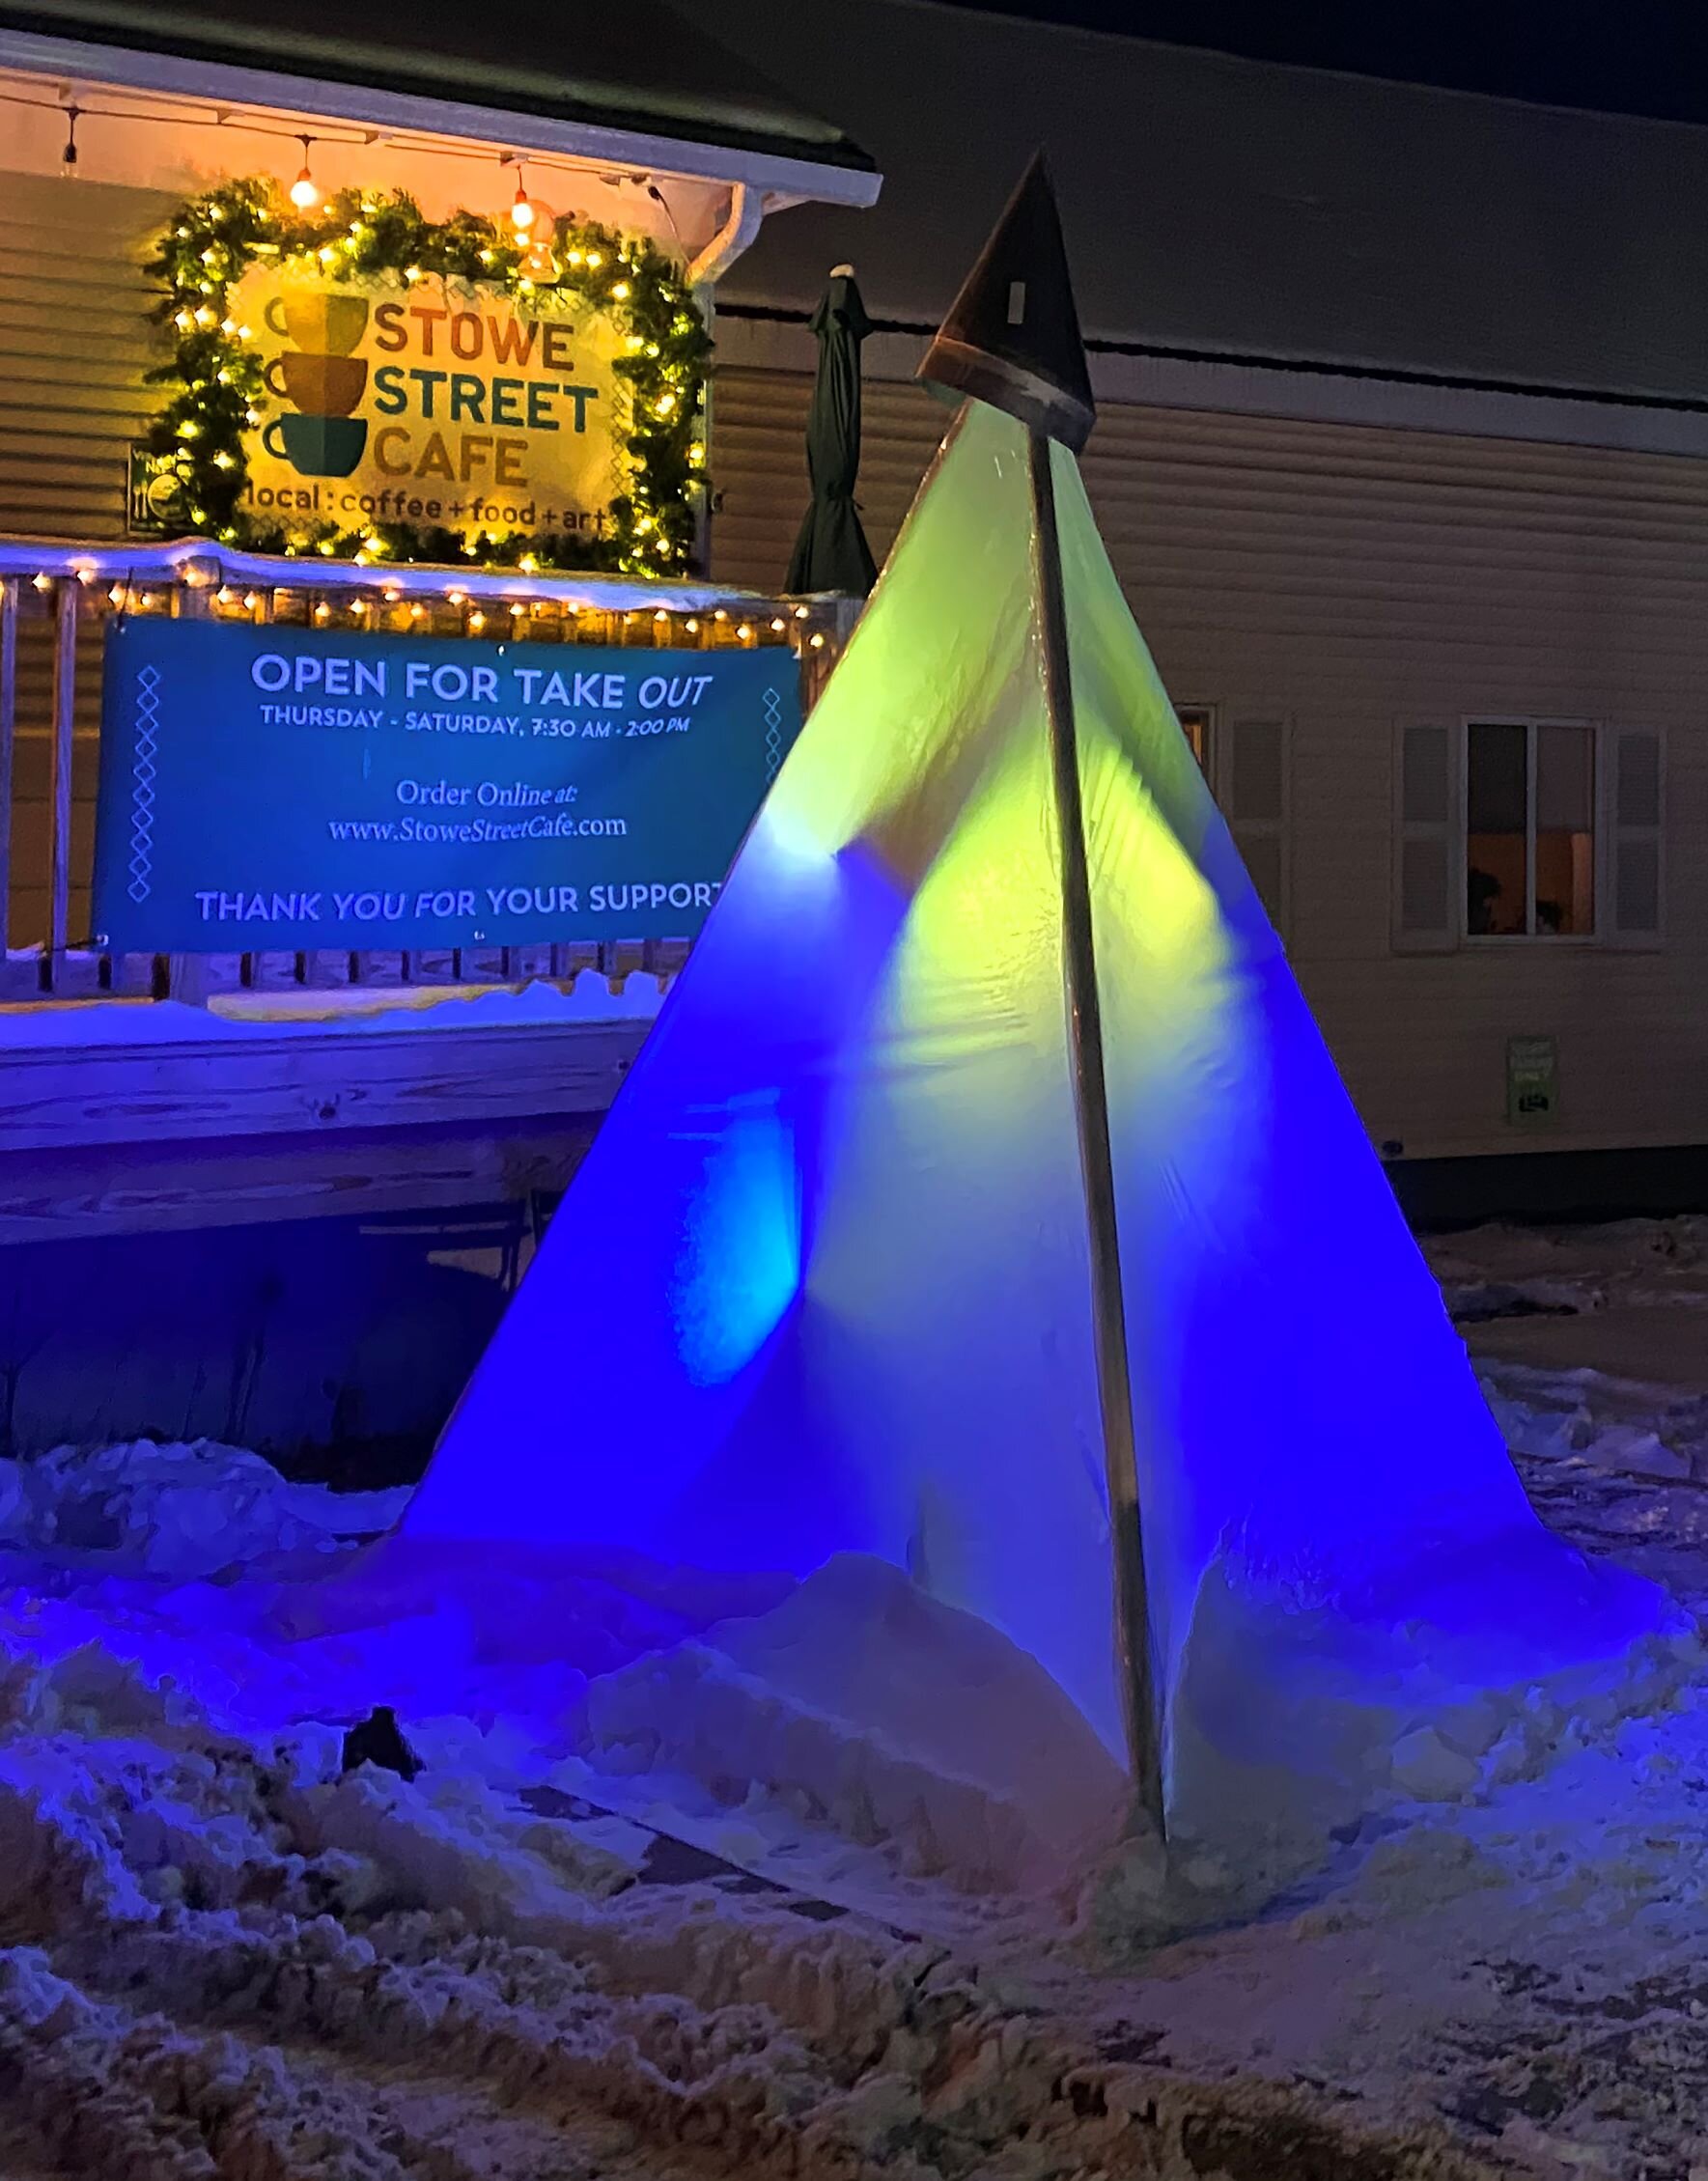   The glowing pyramid titled "Trichotomy" that John Bauer created for River of Light has a new home outside Stowe Street Café. Photo by Gordon Miller.  